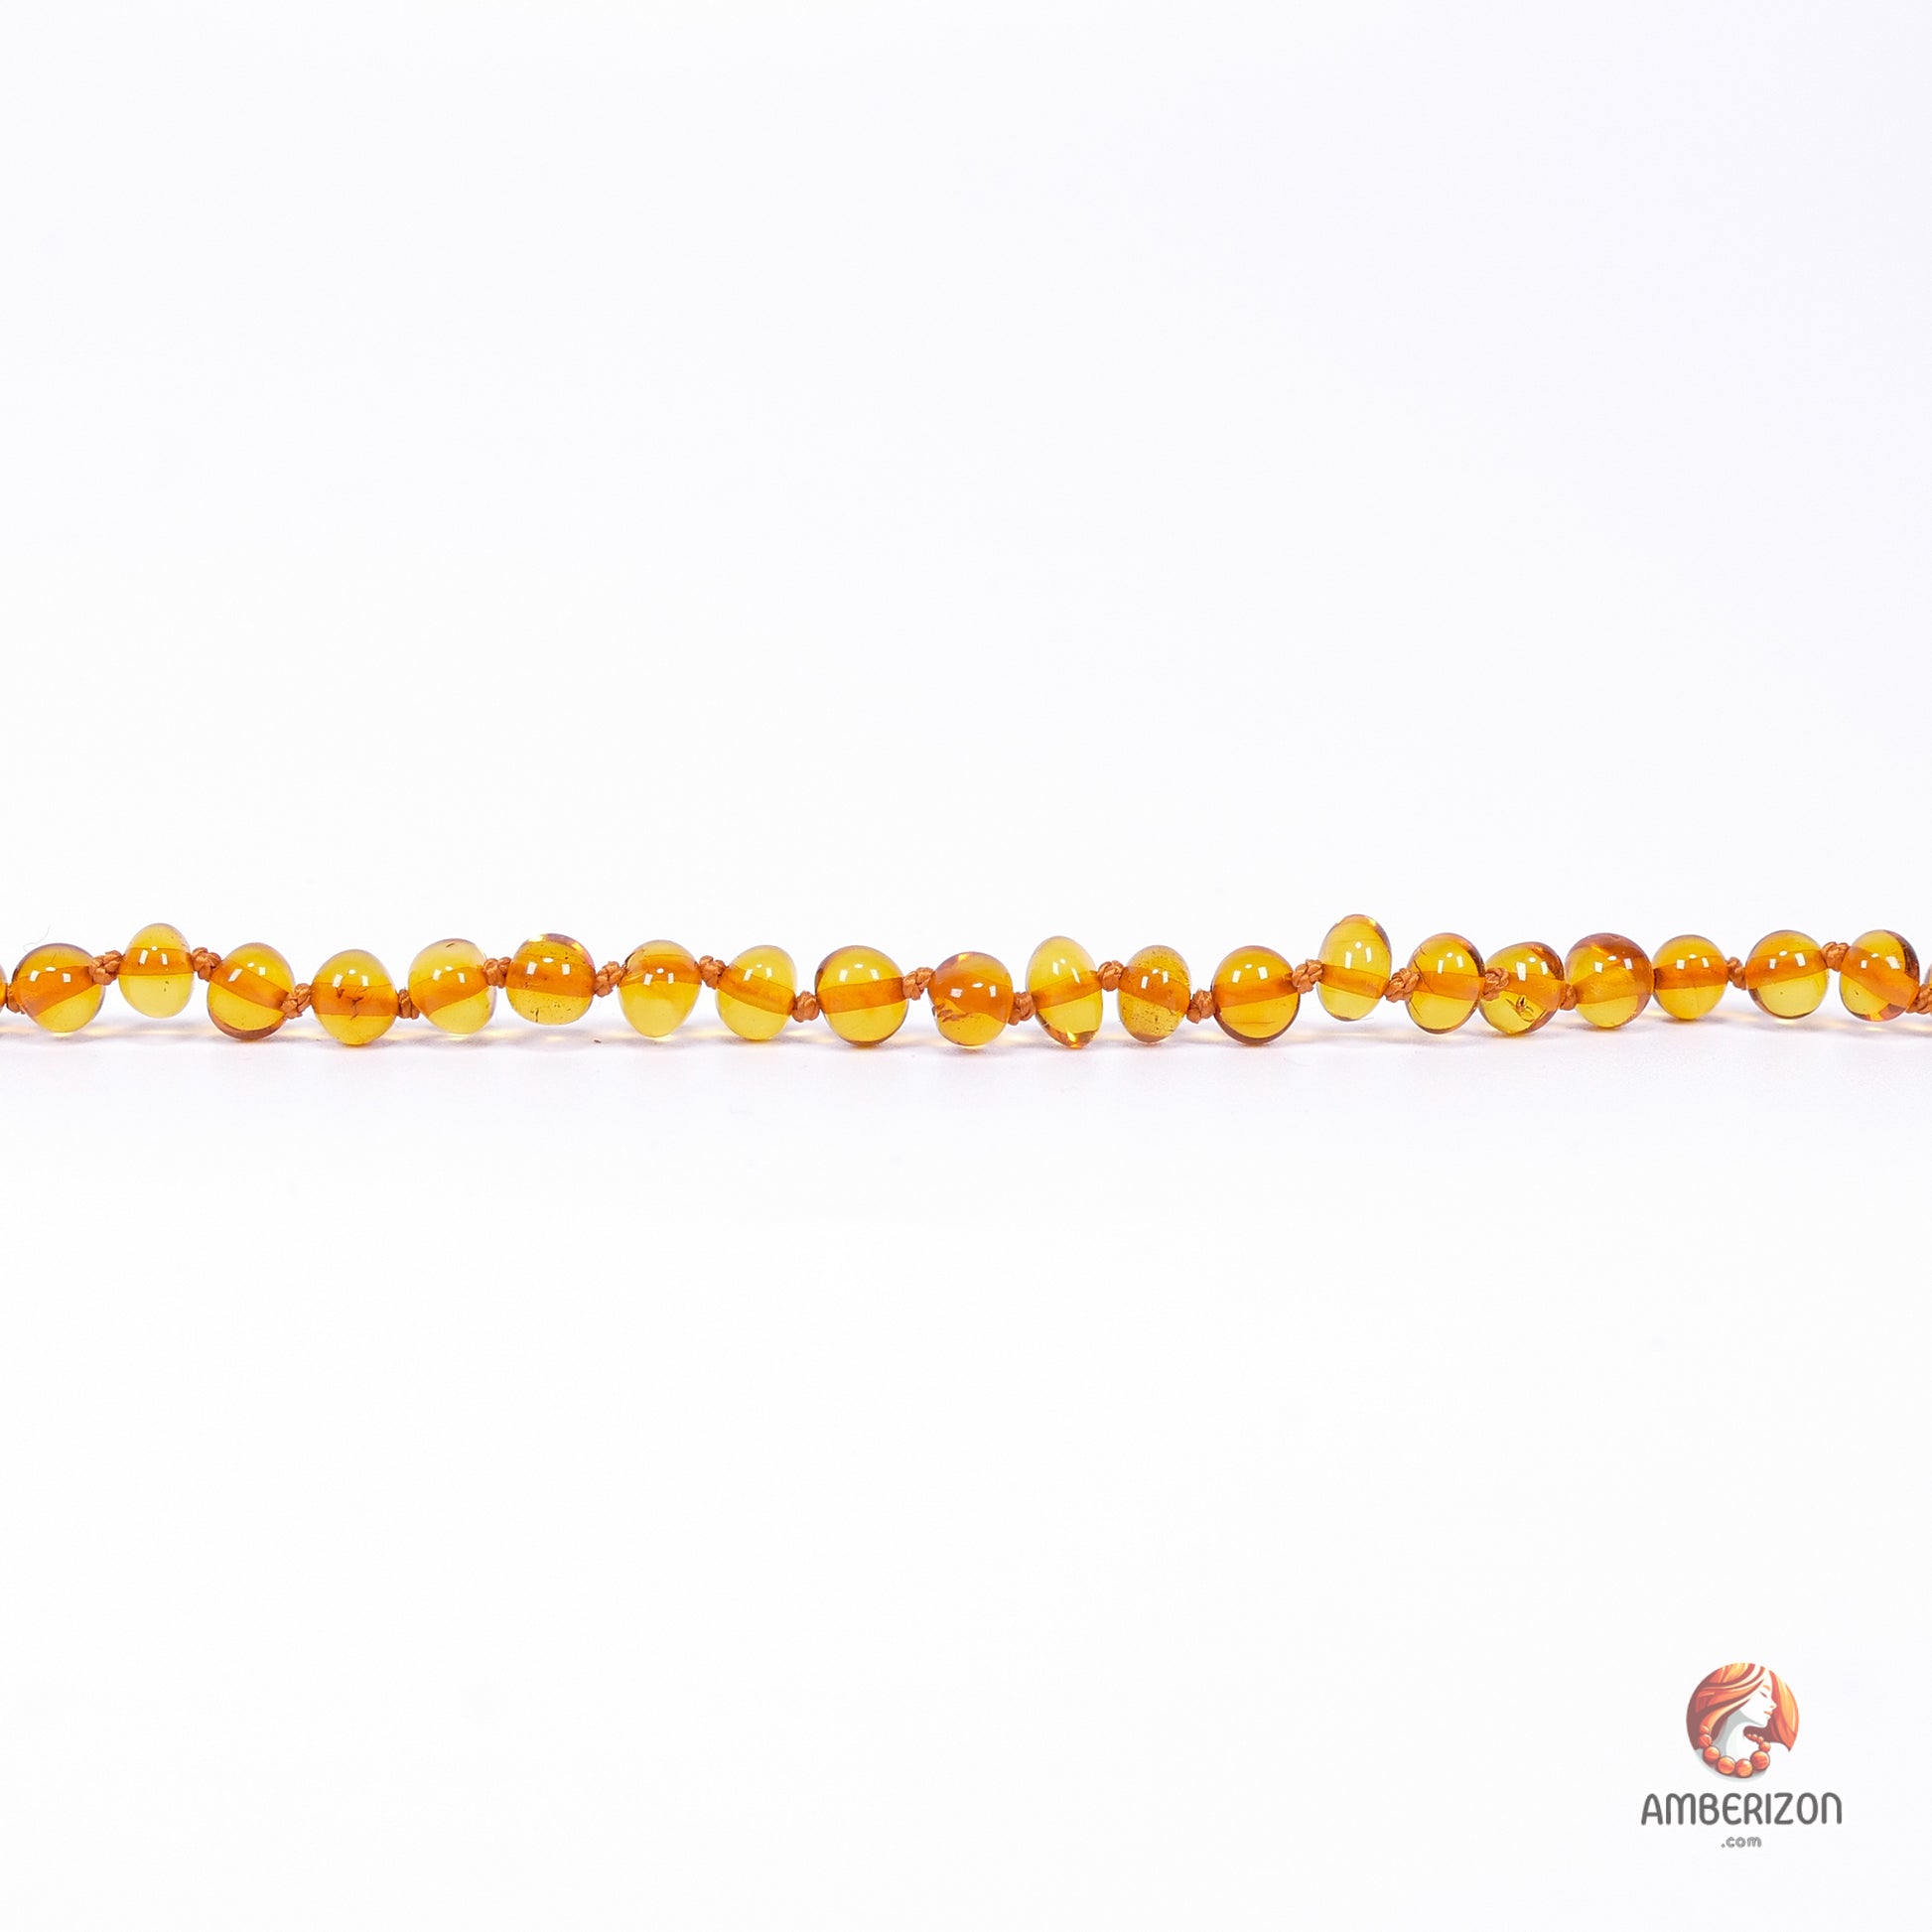 Handcrafted Unisex Baltic Amber Necklace - Honey Color - Twist Barrel Clasp